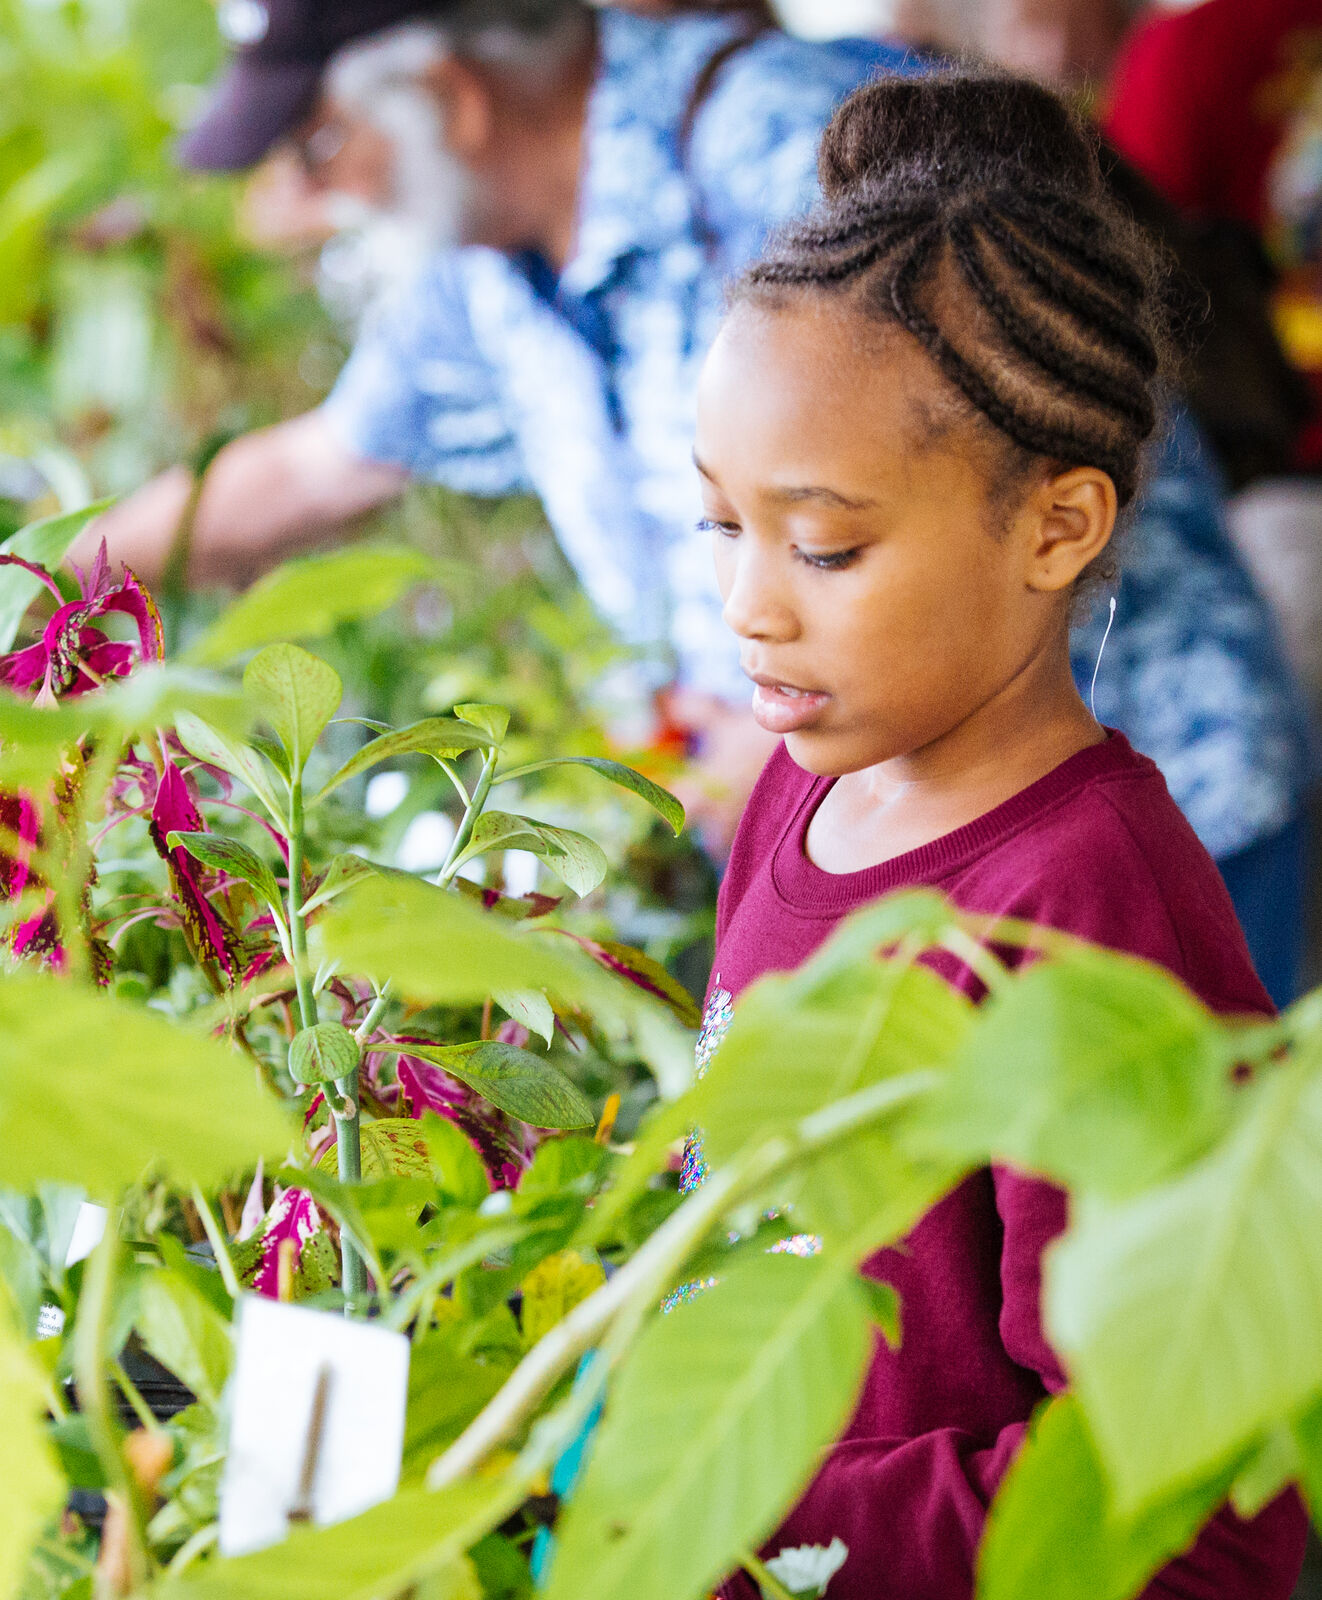 Young girl looking at plants.